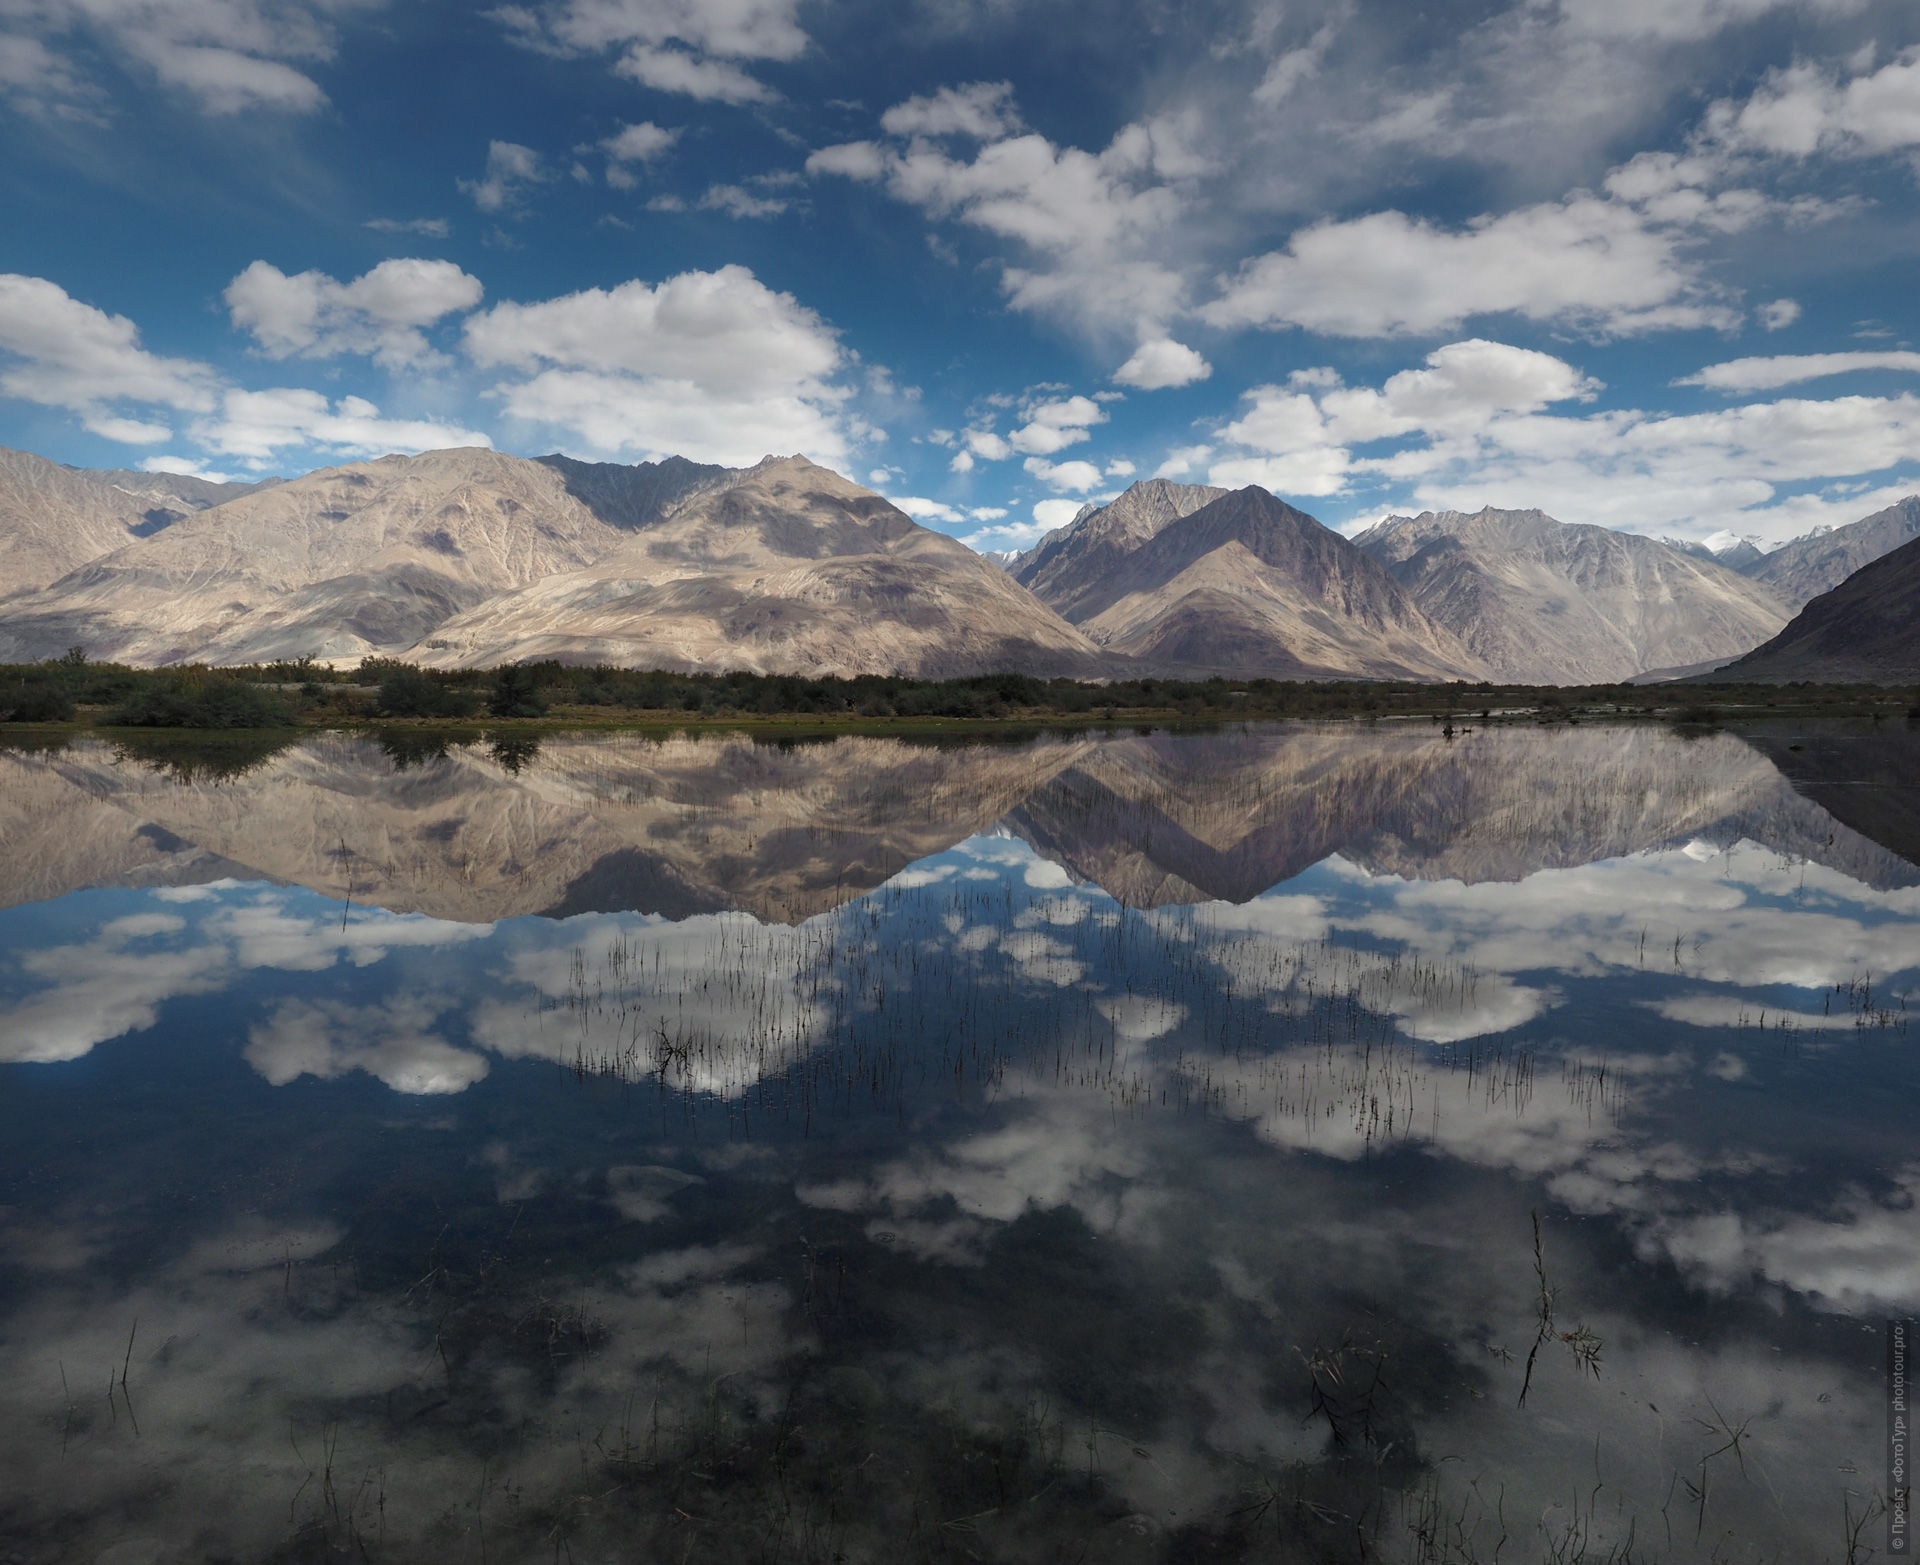 Evening landscape in Nubra valley, Ladakh, Northern India. Photo tour through the valleys of Ladakh and Nubra, October 2023.